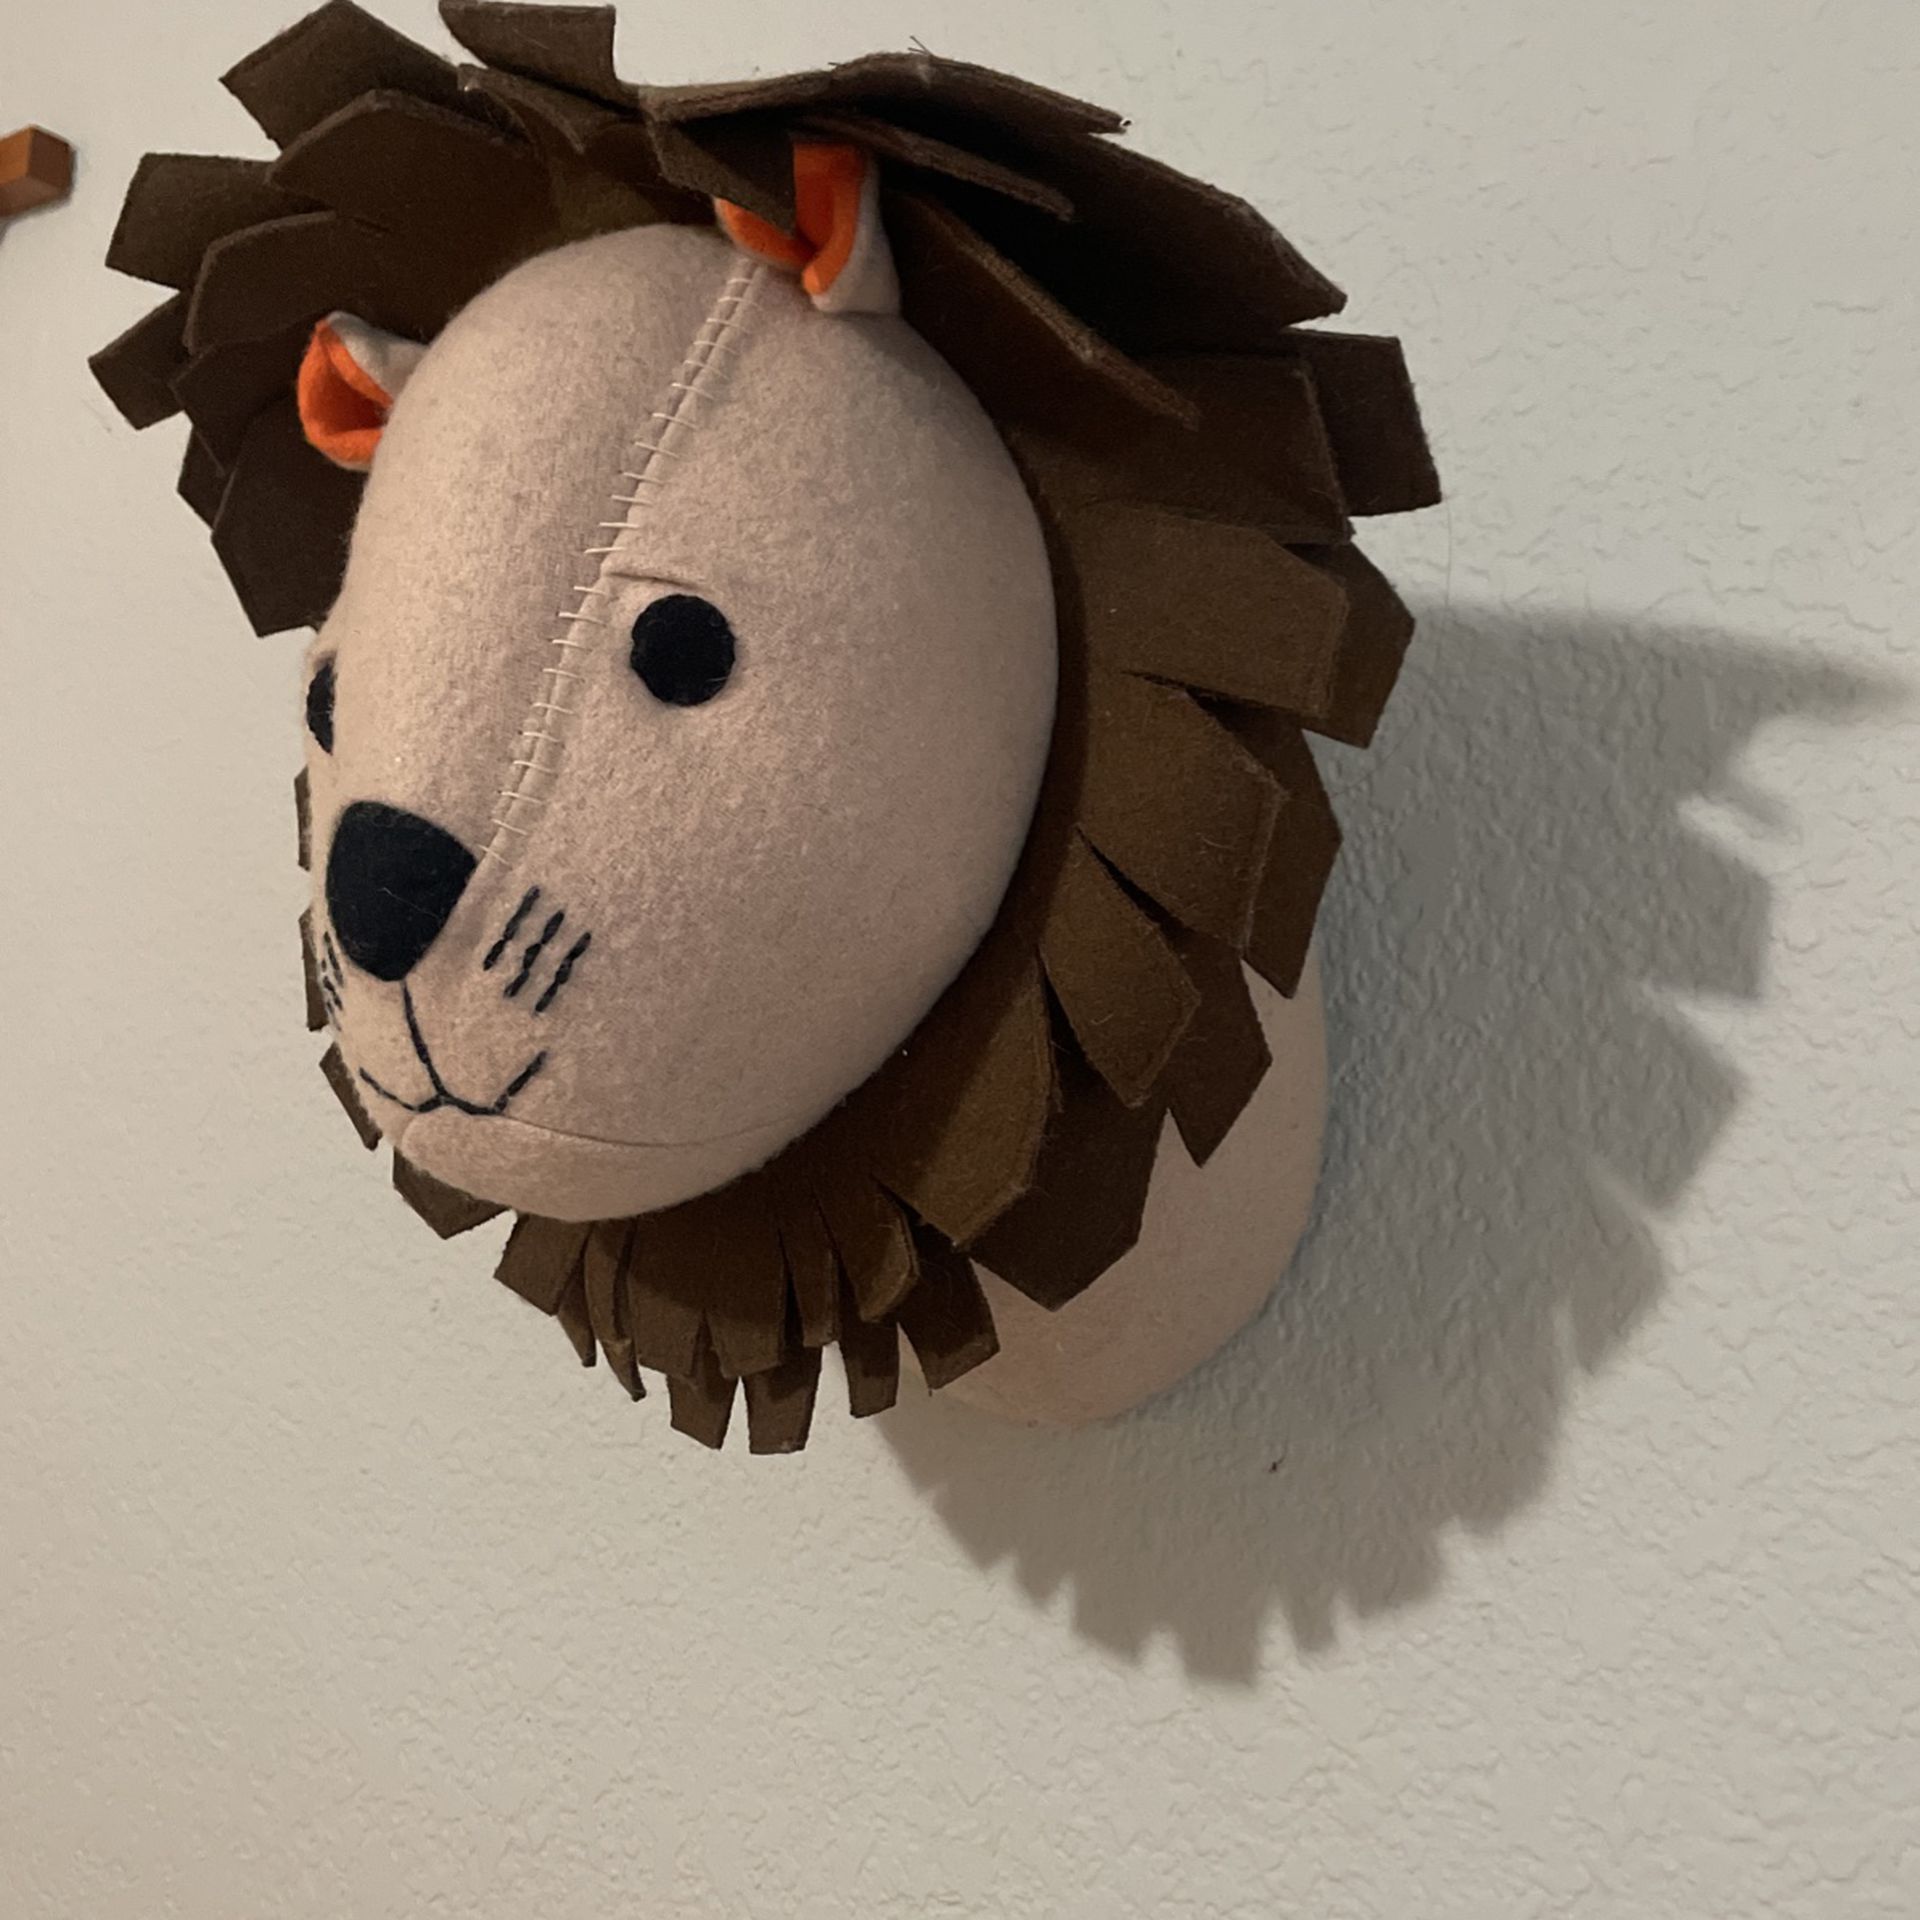 Target Exclusive Pillowfort LION Stuffed Hanging Wall Art Decor 14”. Pre-Owned but in Great Condition. Perfect for Nurseries, Play Rooms & Kids Rooms